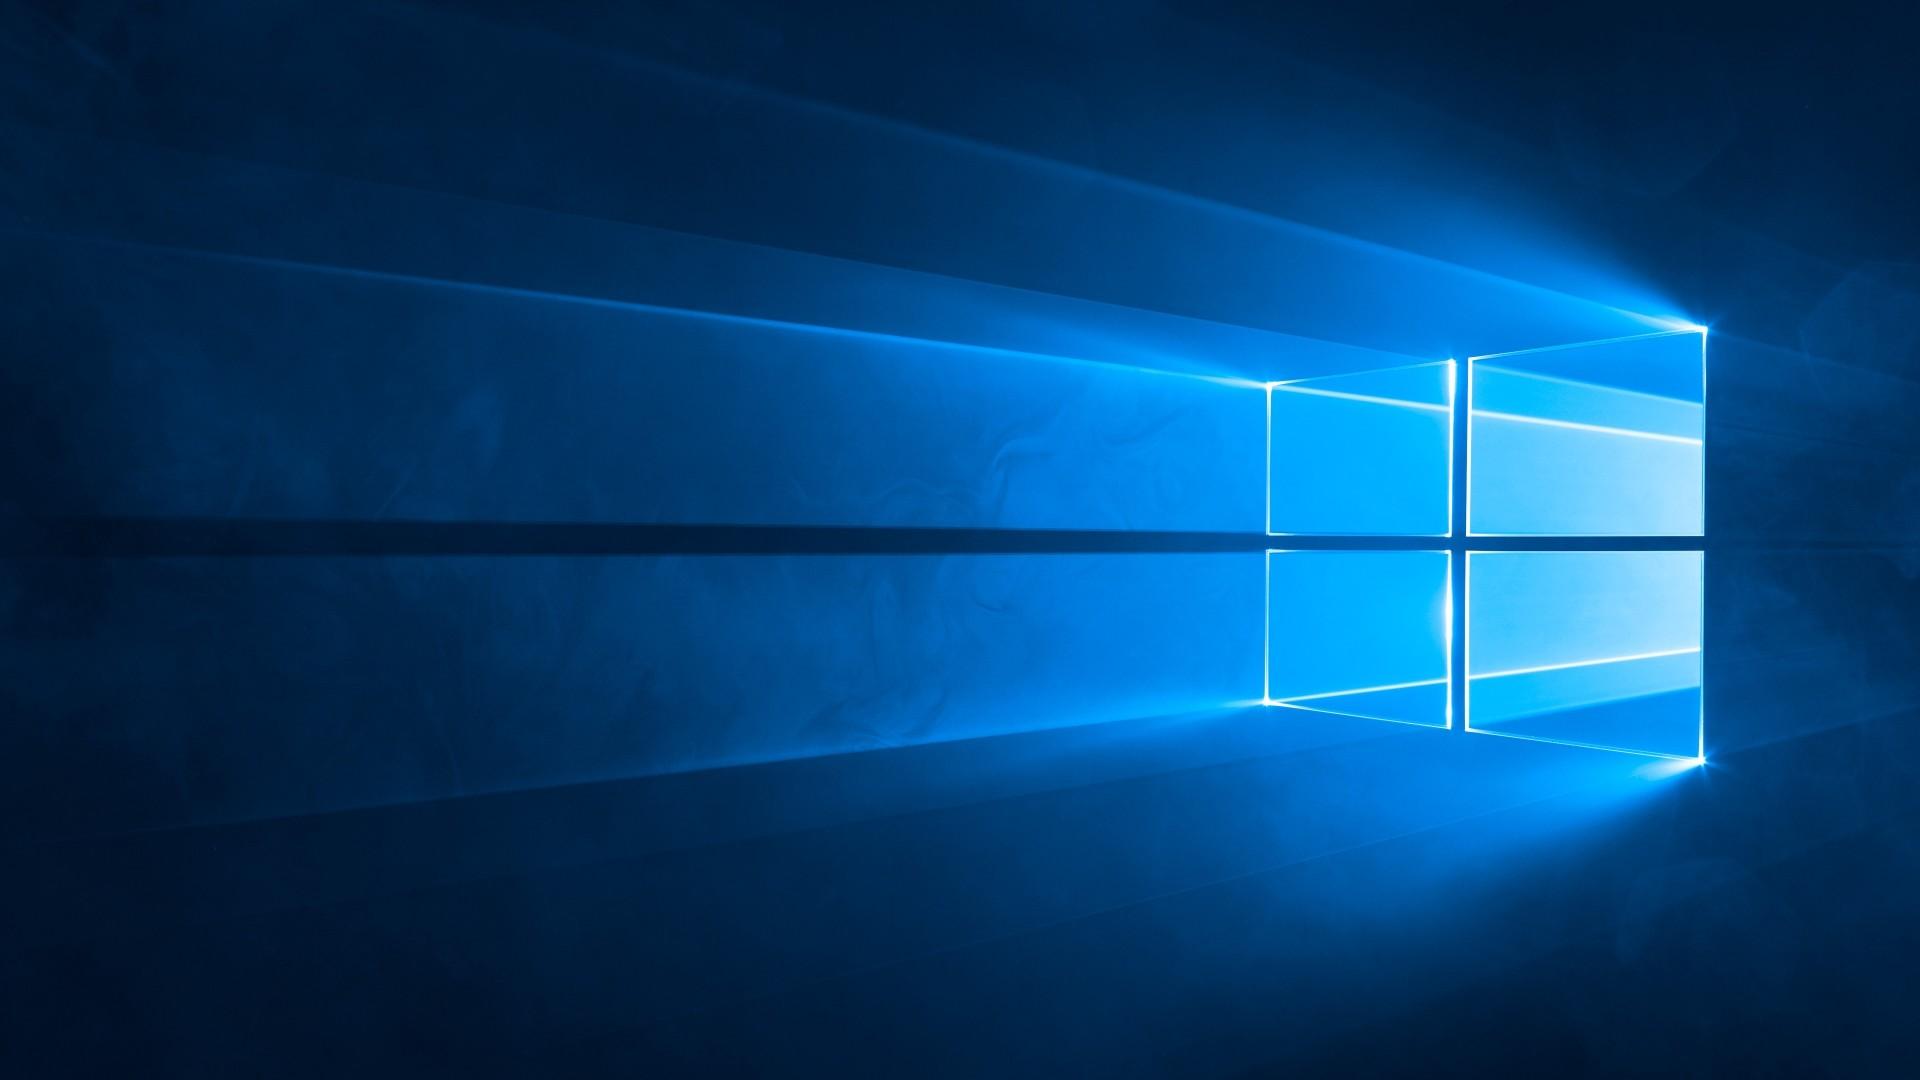 1920 x 1080 · jpeg - Windows 10 Wallpapers and themes (76+ images)